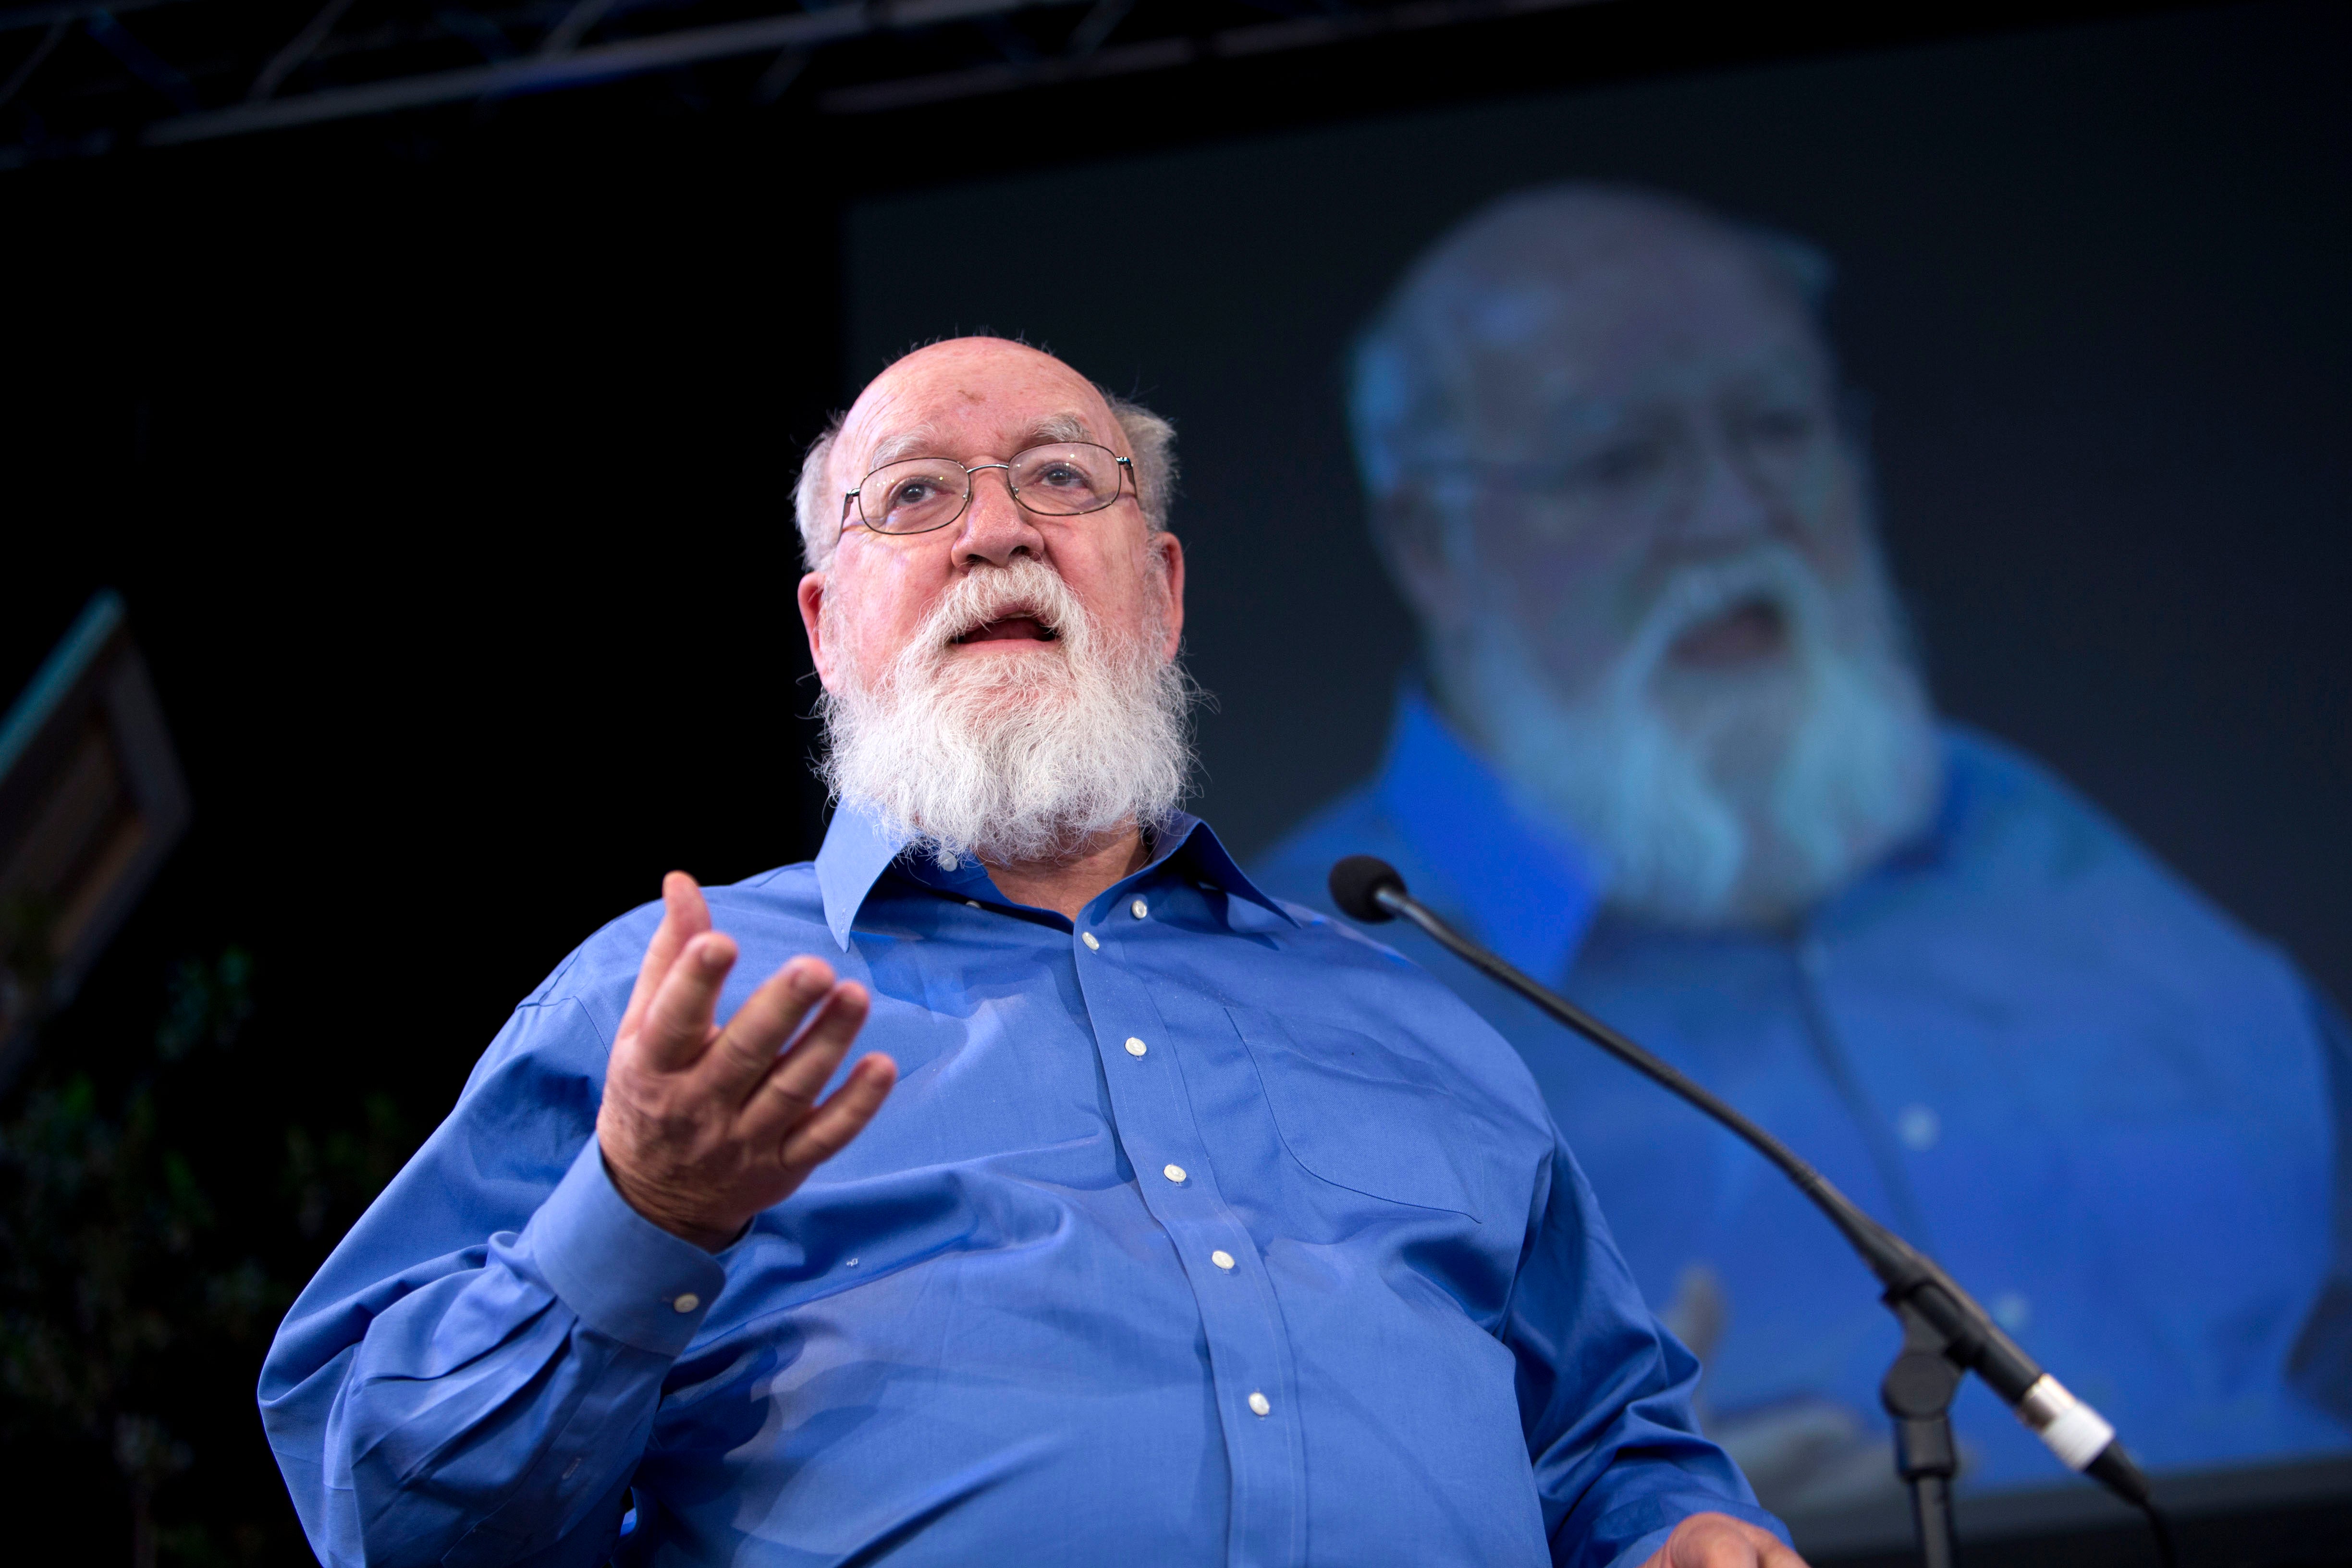 Daniel Dennett speaking as his image is displayed on screen in the background